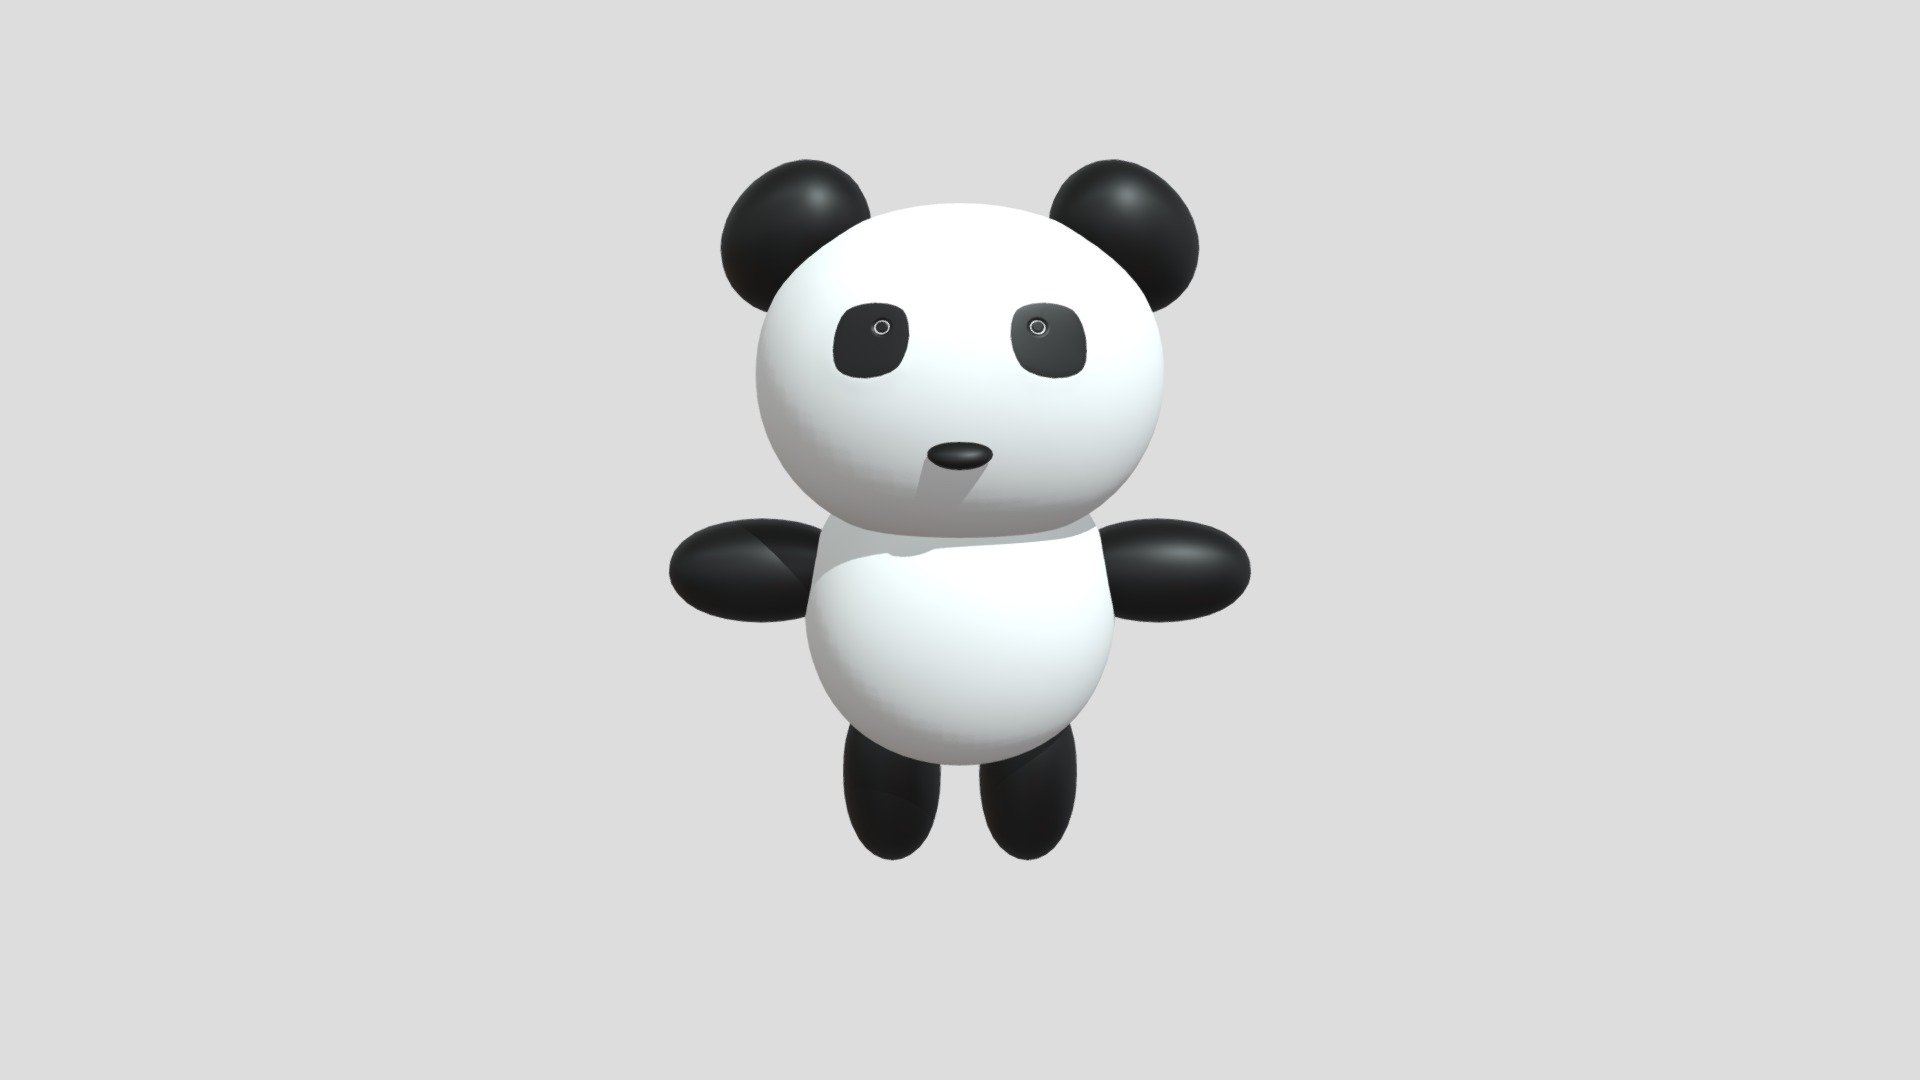 Cartoon Panda.

Made with Blender 2.8.

Rendered with Cycles.

system units -: m.

Polygons: 6,100.

Vertices: 6,136.

This model included 7 objects.

Formats: . blend . fbx . obj, c4d,dae,fbx,unity.

Thank you 3d model